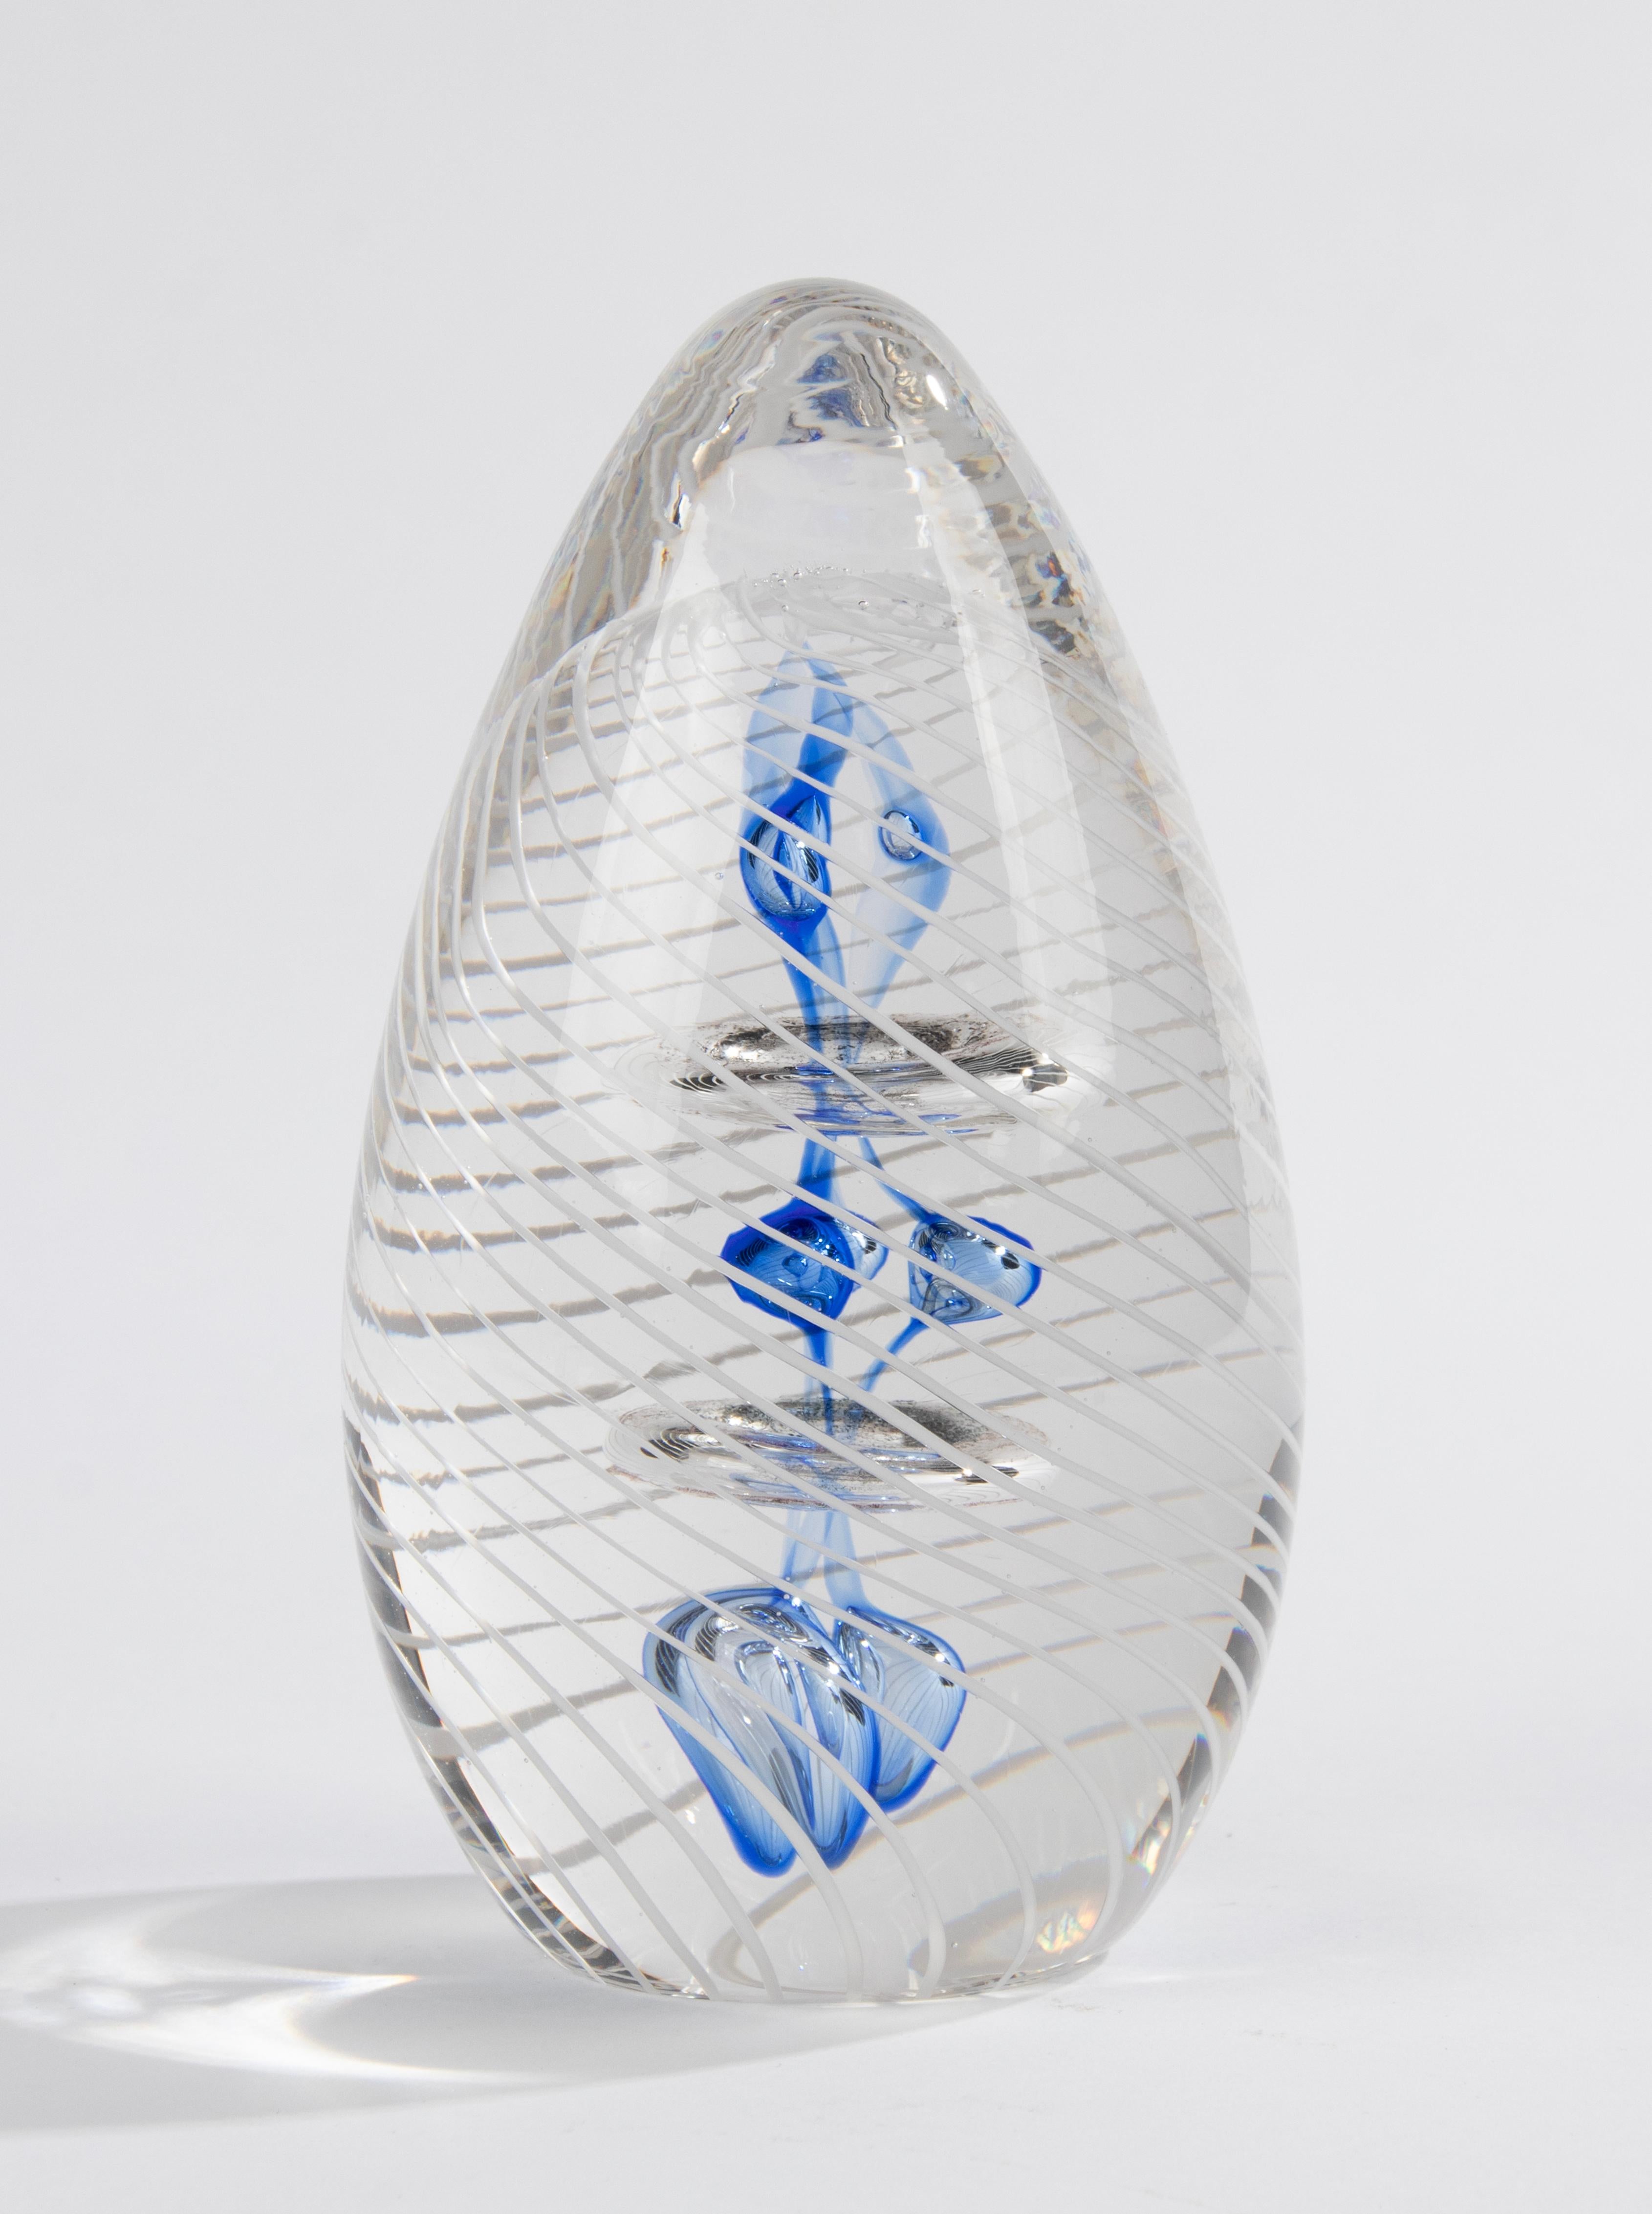 Vintage Italian Murano cone shaped glass paperweight, hand blown with swirls and arrays.  Made in Italy, 1970-1980. In good condition.

Dimension: 14 (h) x 7 x 7 cm
Free shipping worldwide 